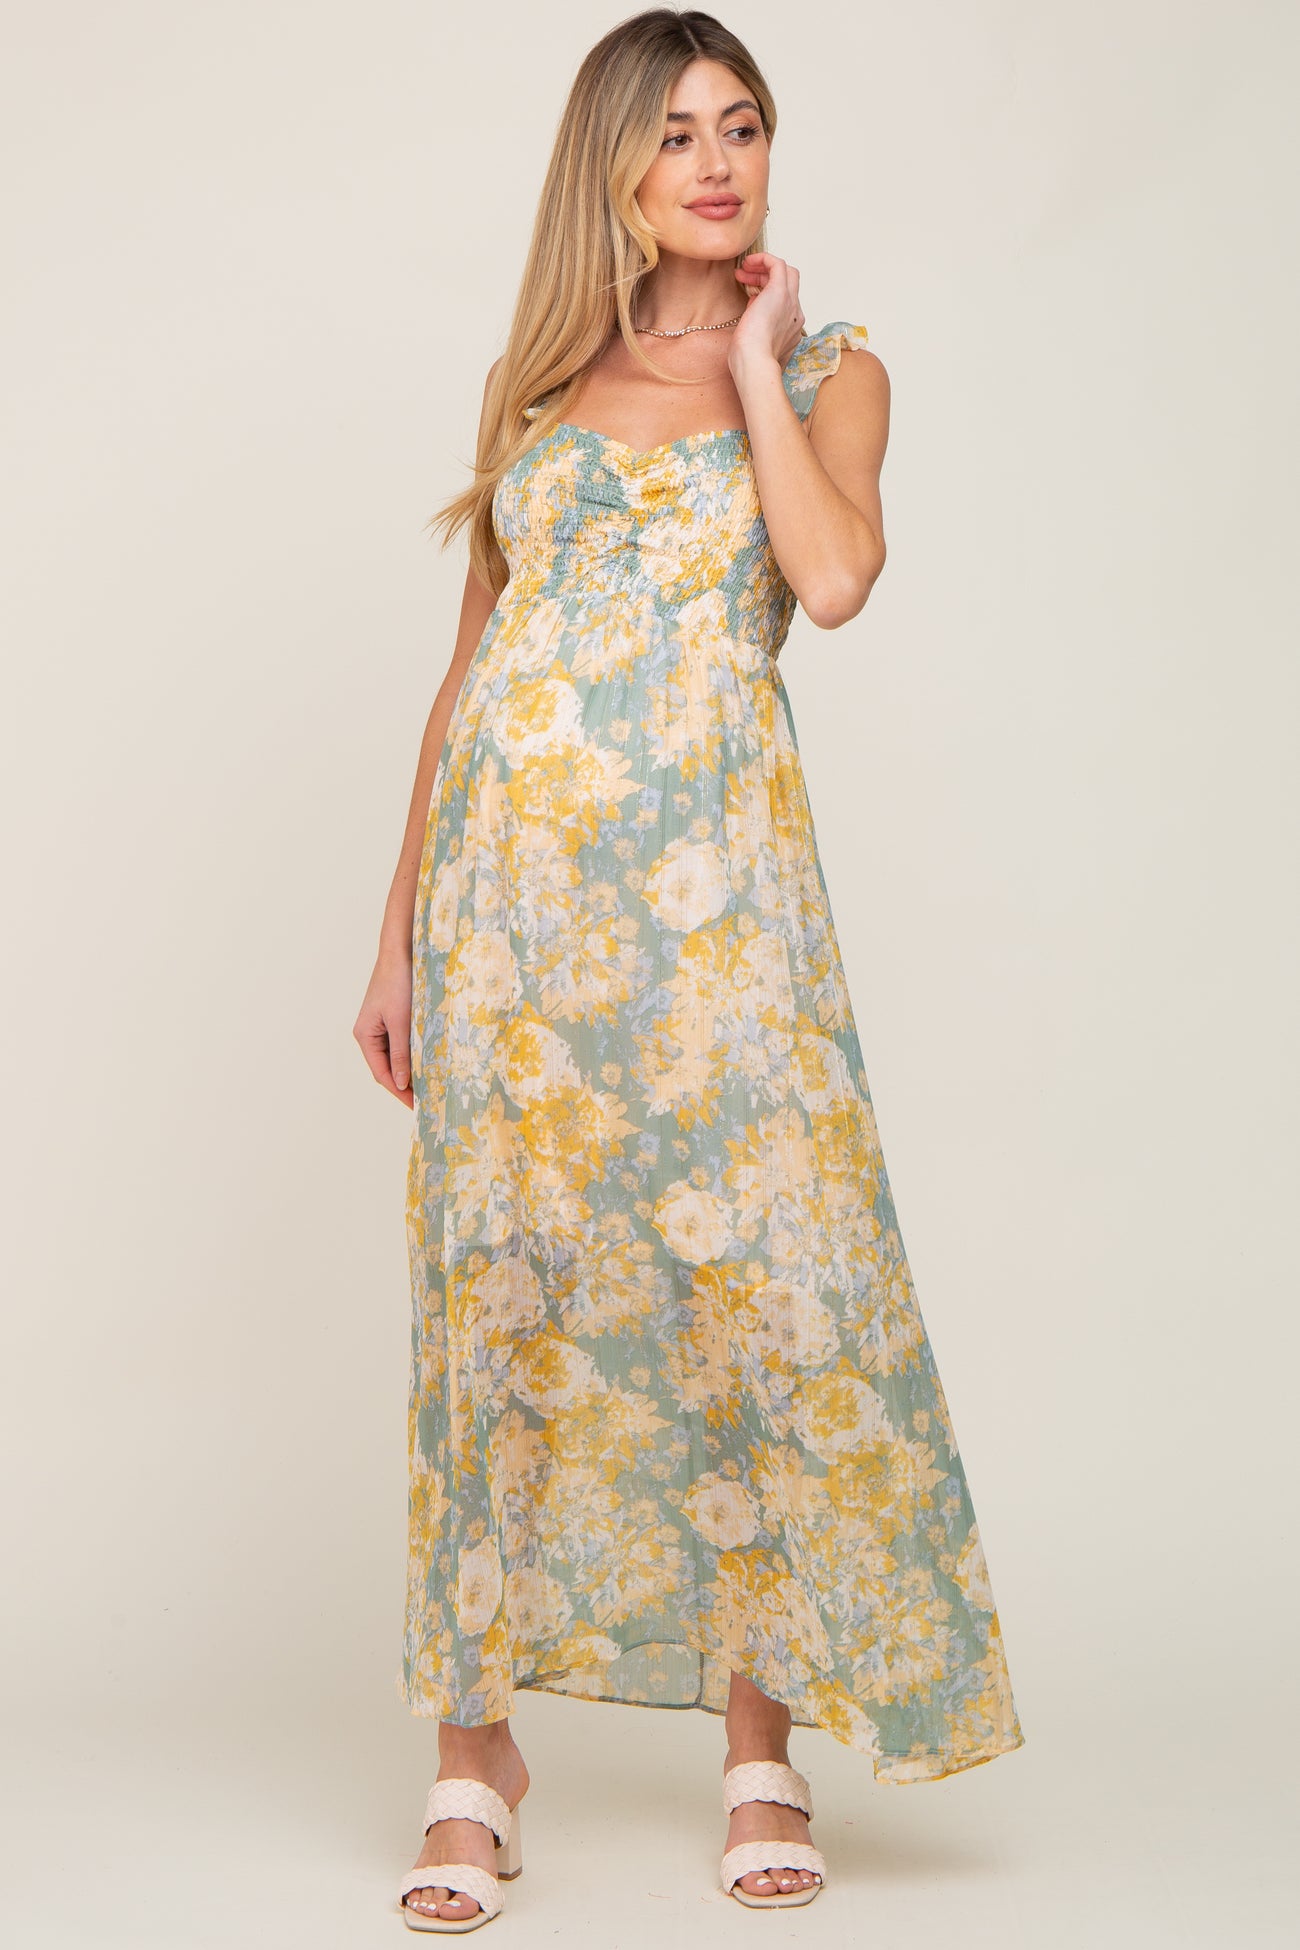 Green Ditsy Floral Ruffle Accent Maternity Maxi Dress– PinkBlush